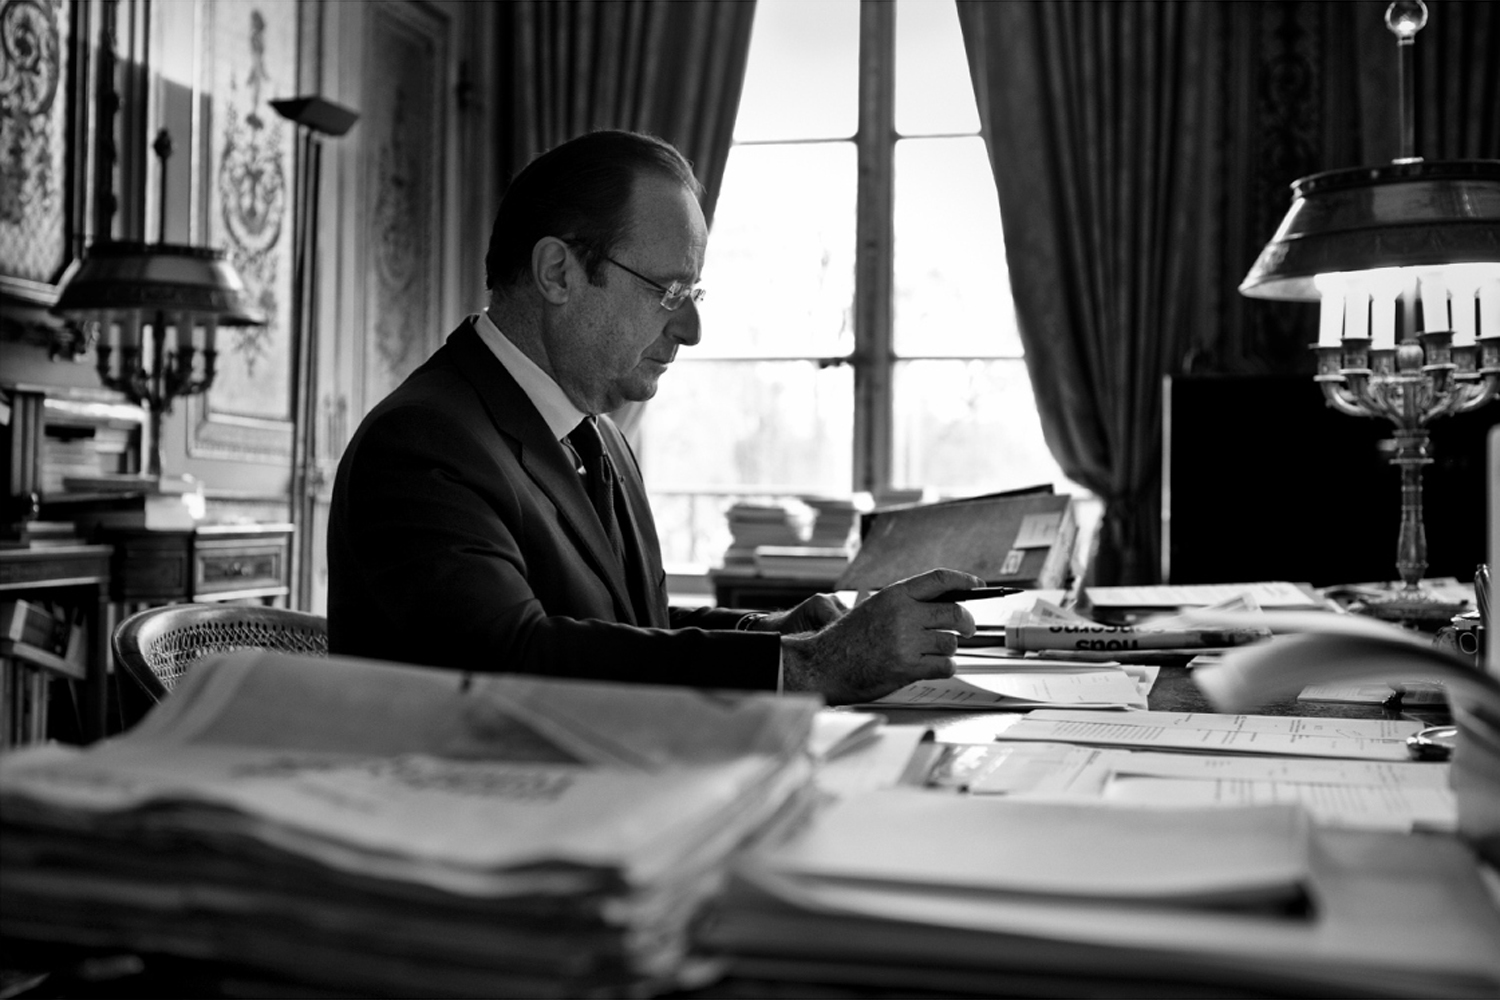 France’s President François Hollande in his office at the presidential Élysée Palace in Paris, France. January 2014